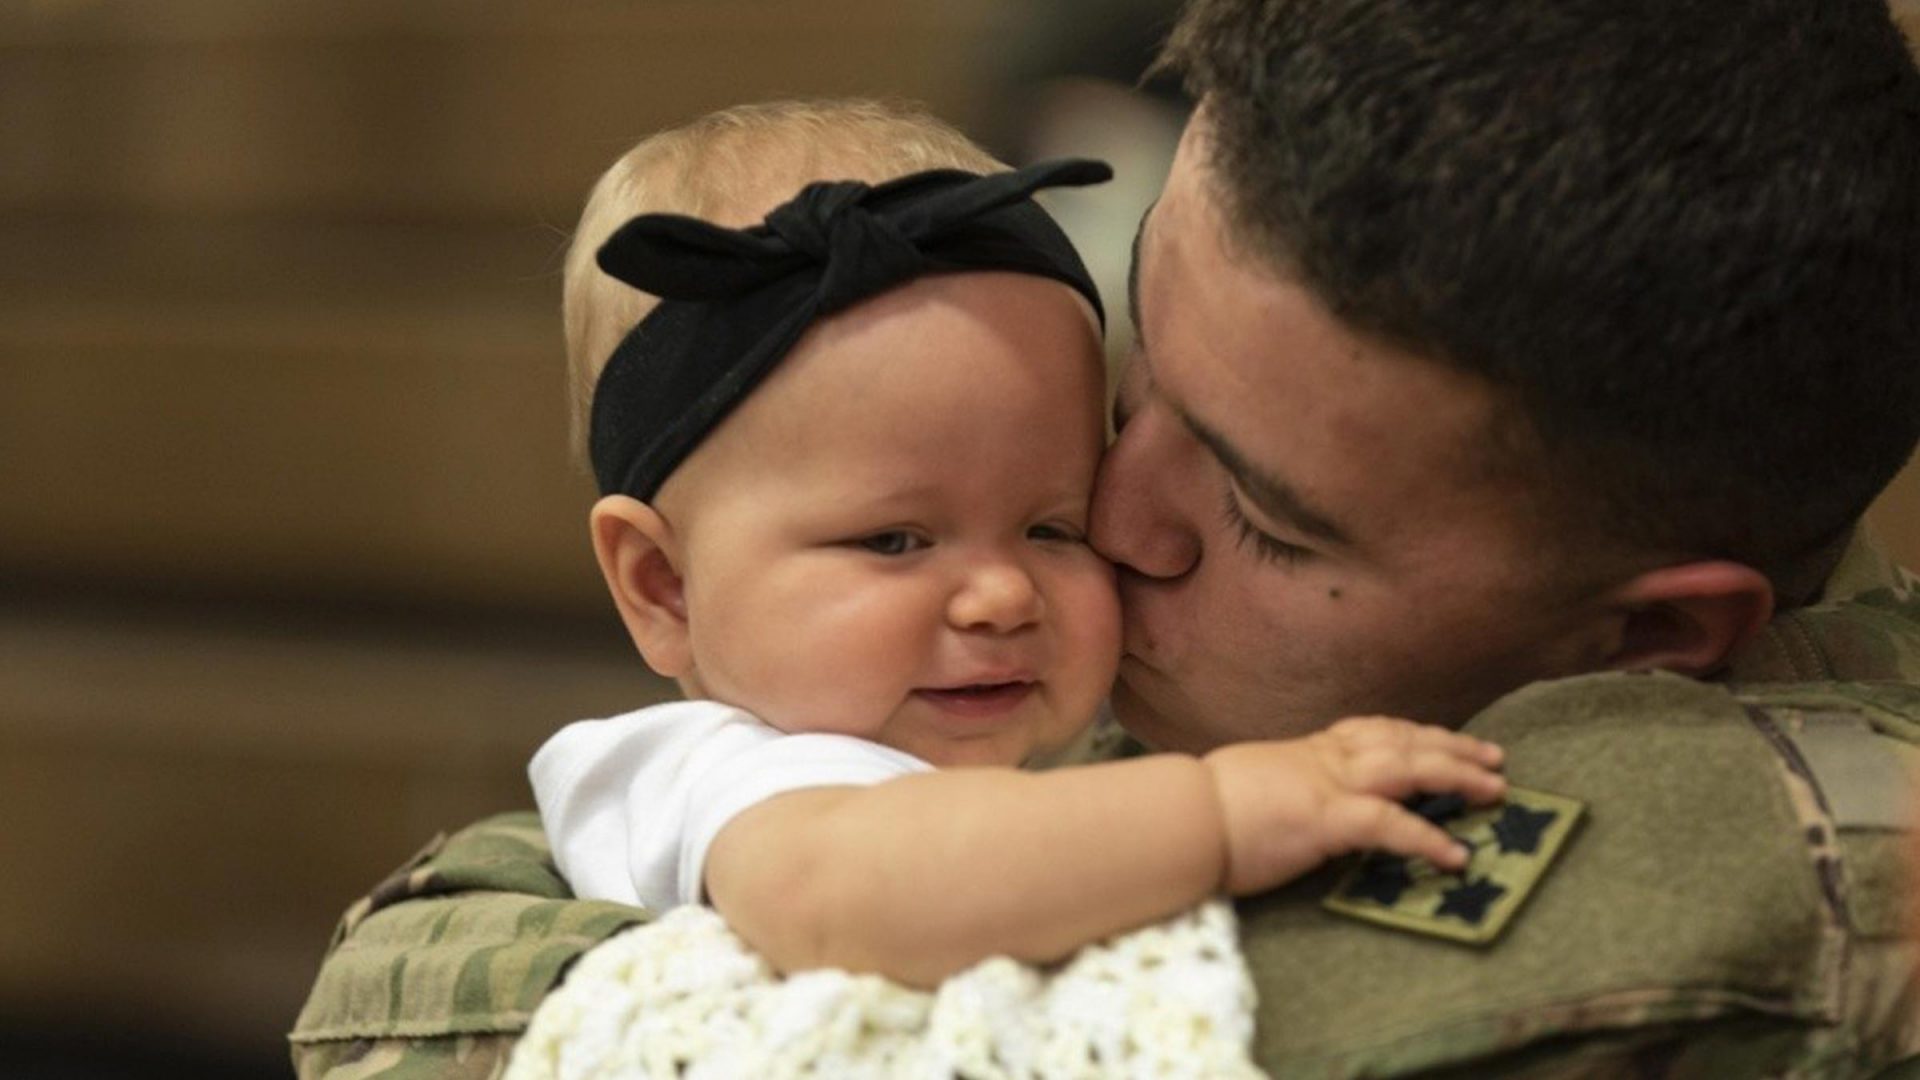 A military father kissing a baby